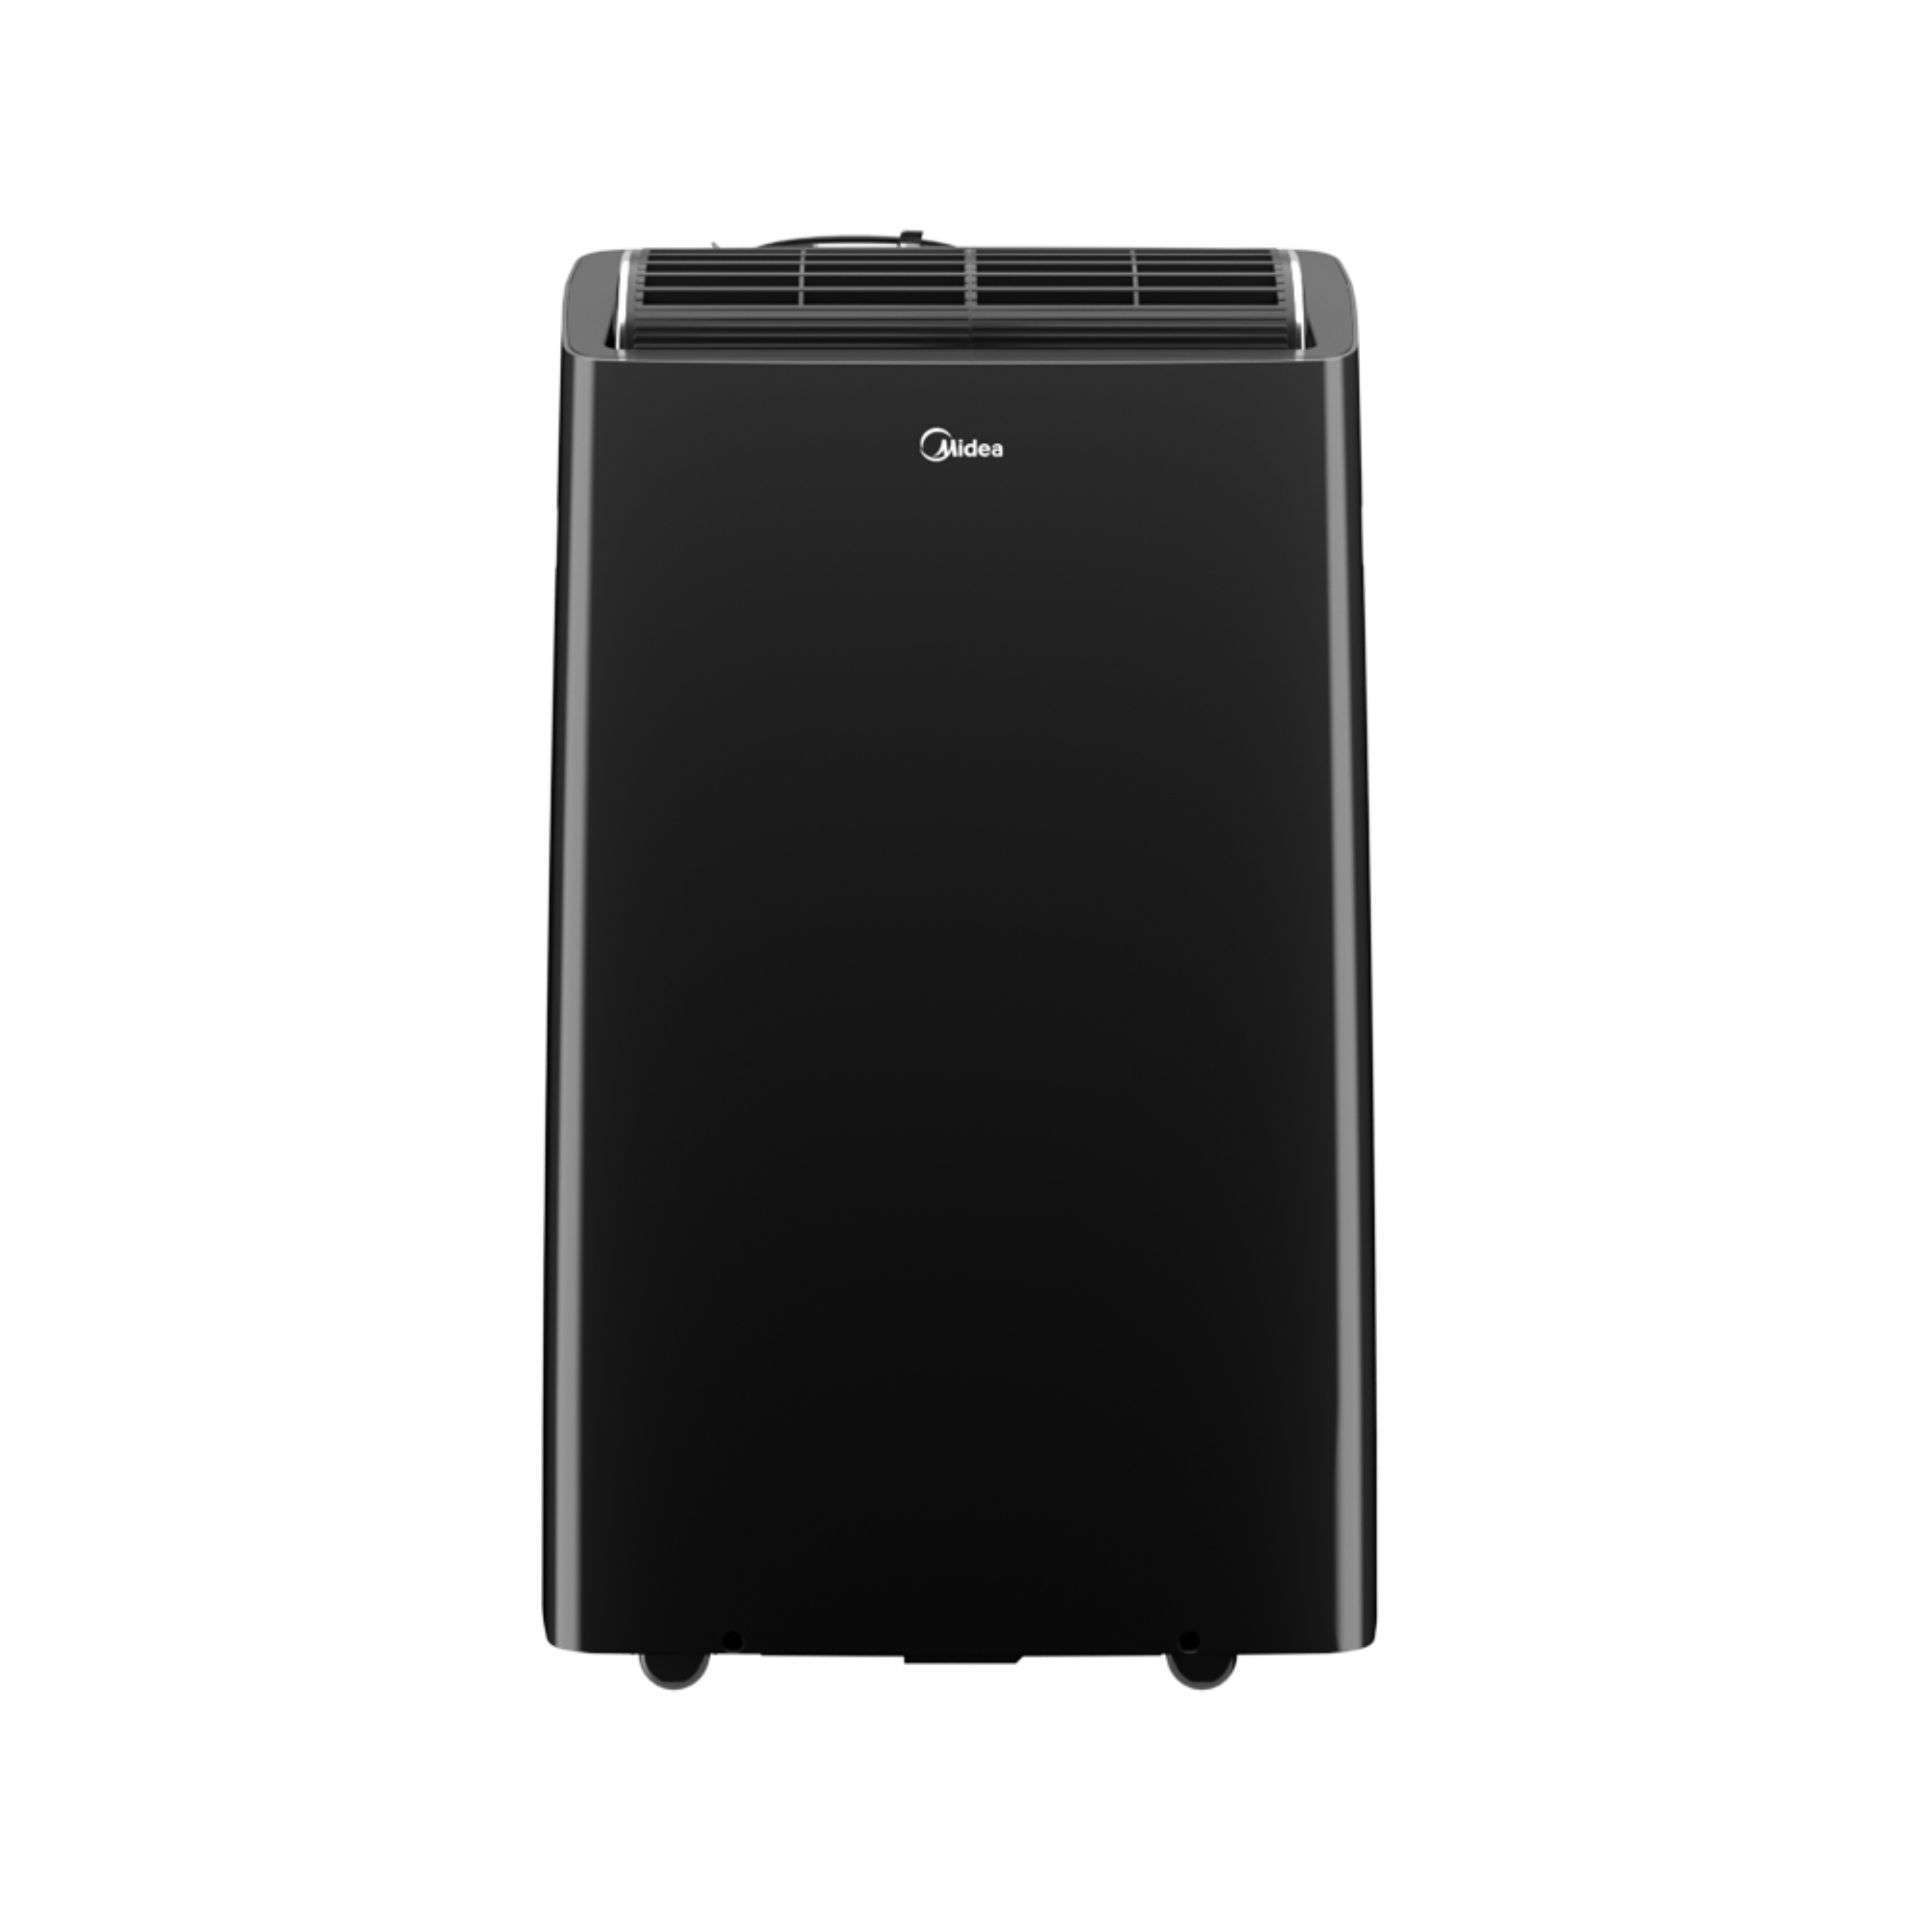 14,000 BTU (12,000 SACC) Portable Air Conditioner with Inverter and Heat Pump